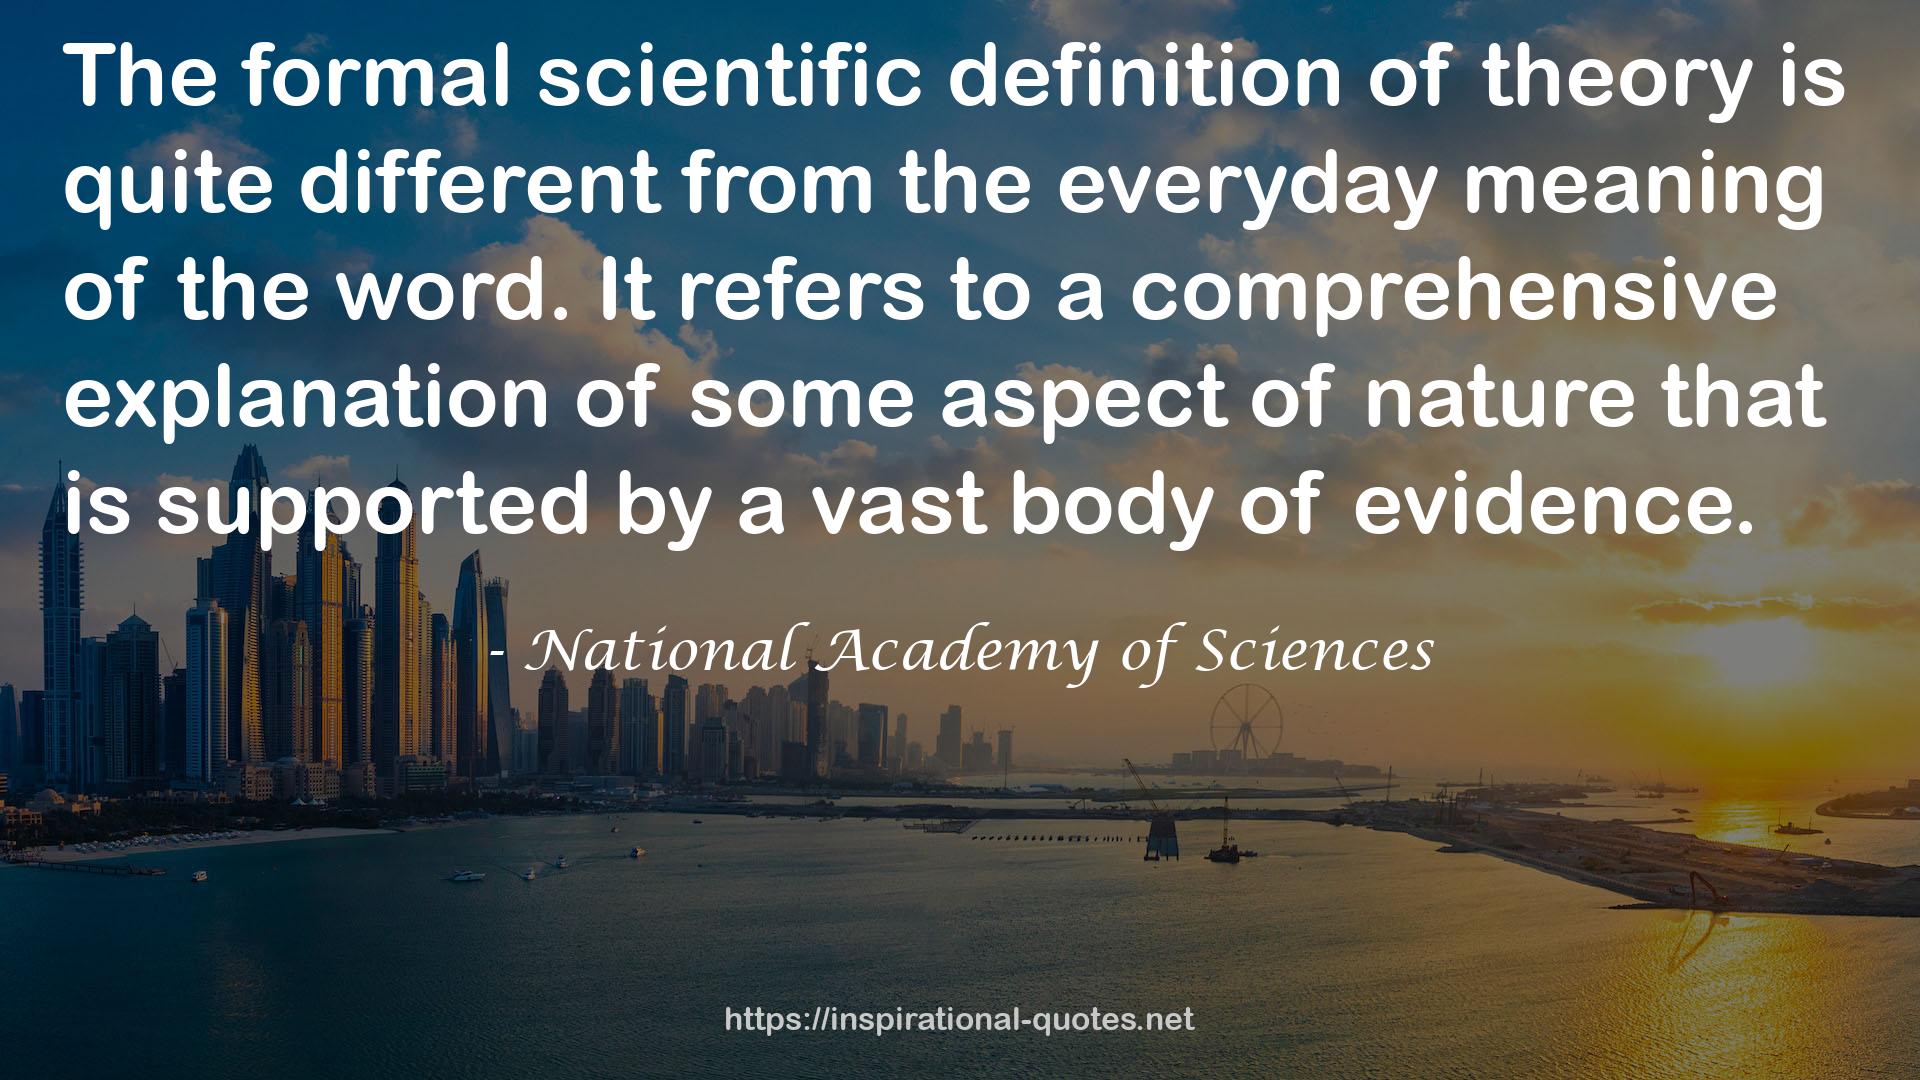 National Academy of Sciences QUOTES